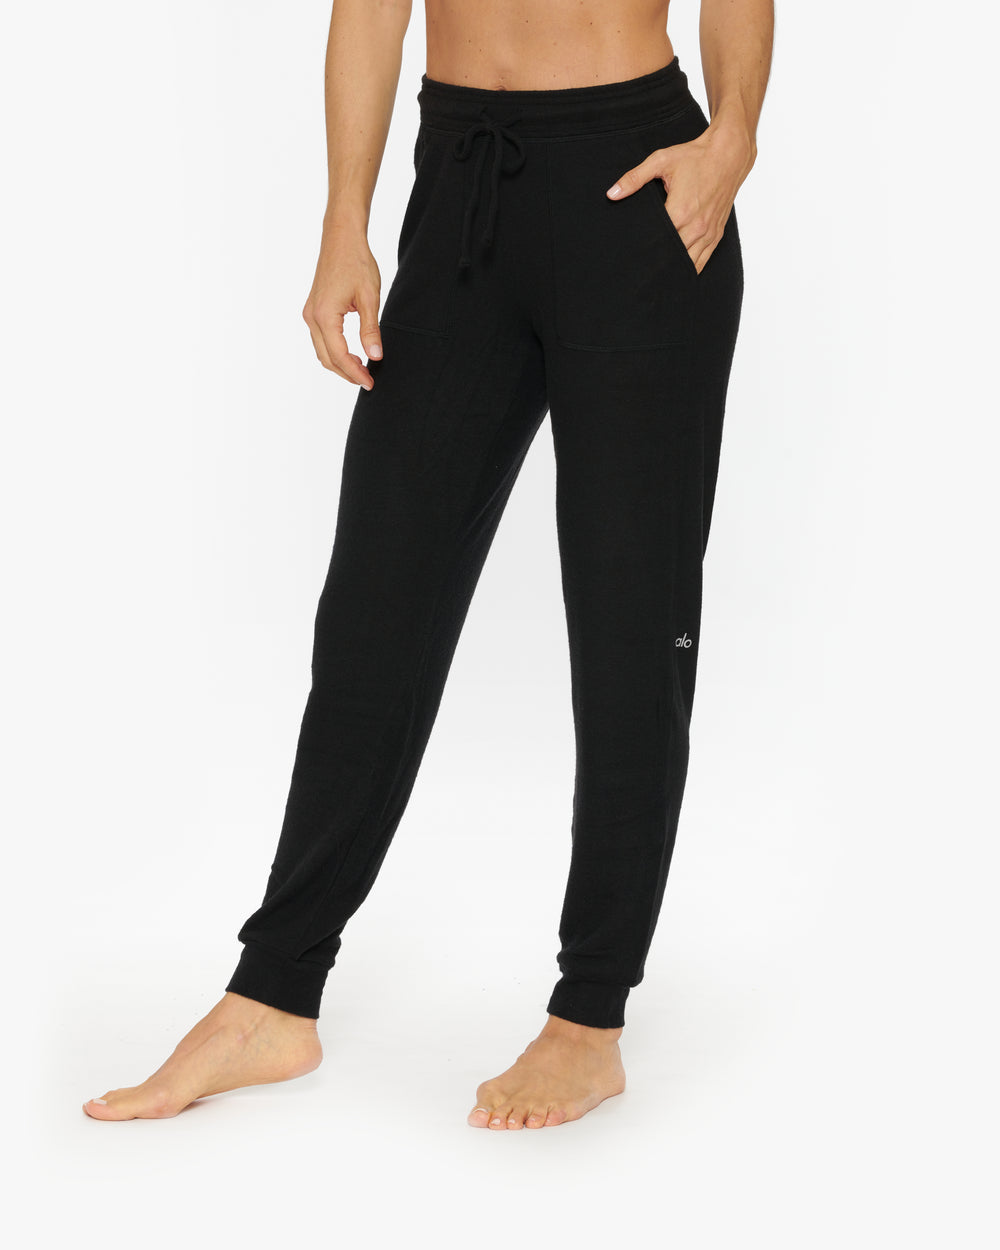 NWT SOLD OUT - ALO WOMEN'S FIERCE DISTRESSED JOGGER SWEATPANTS - BLACK -  SMALL 